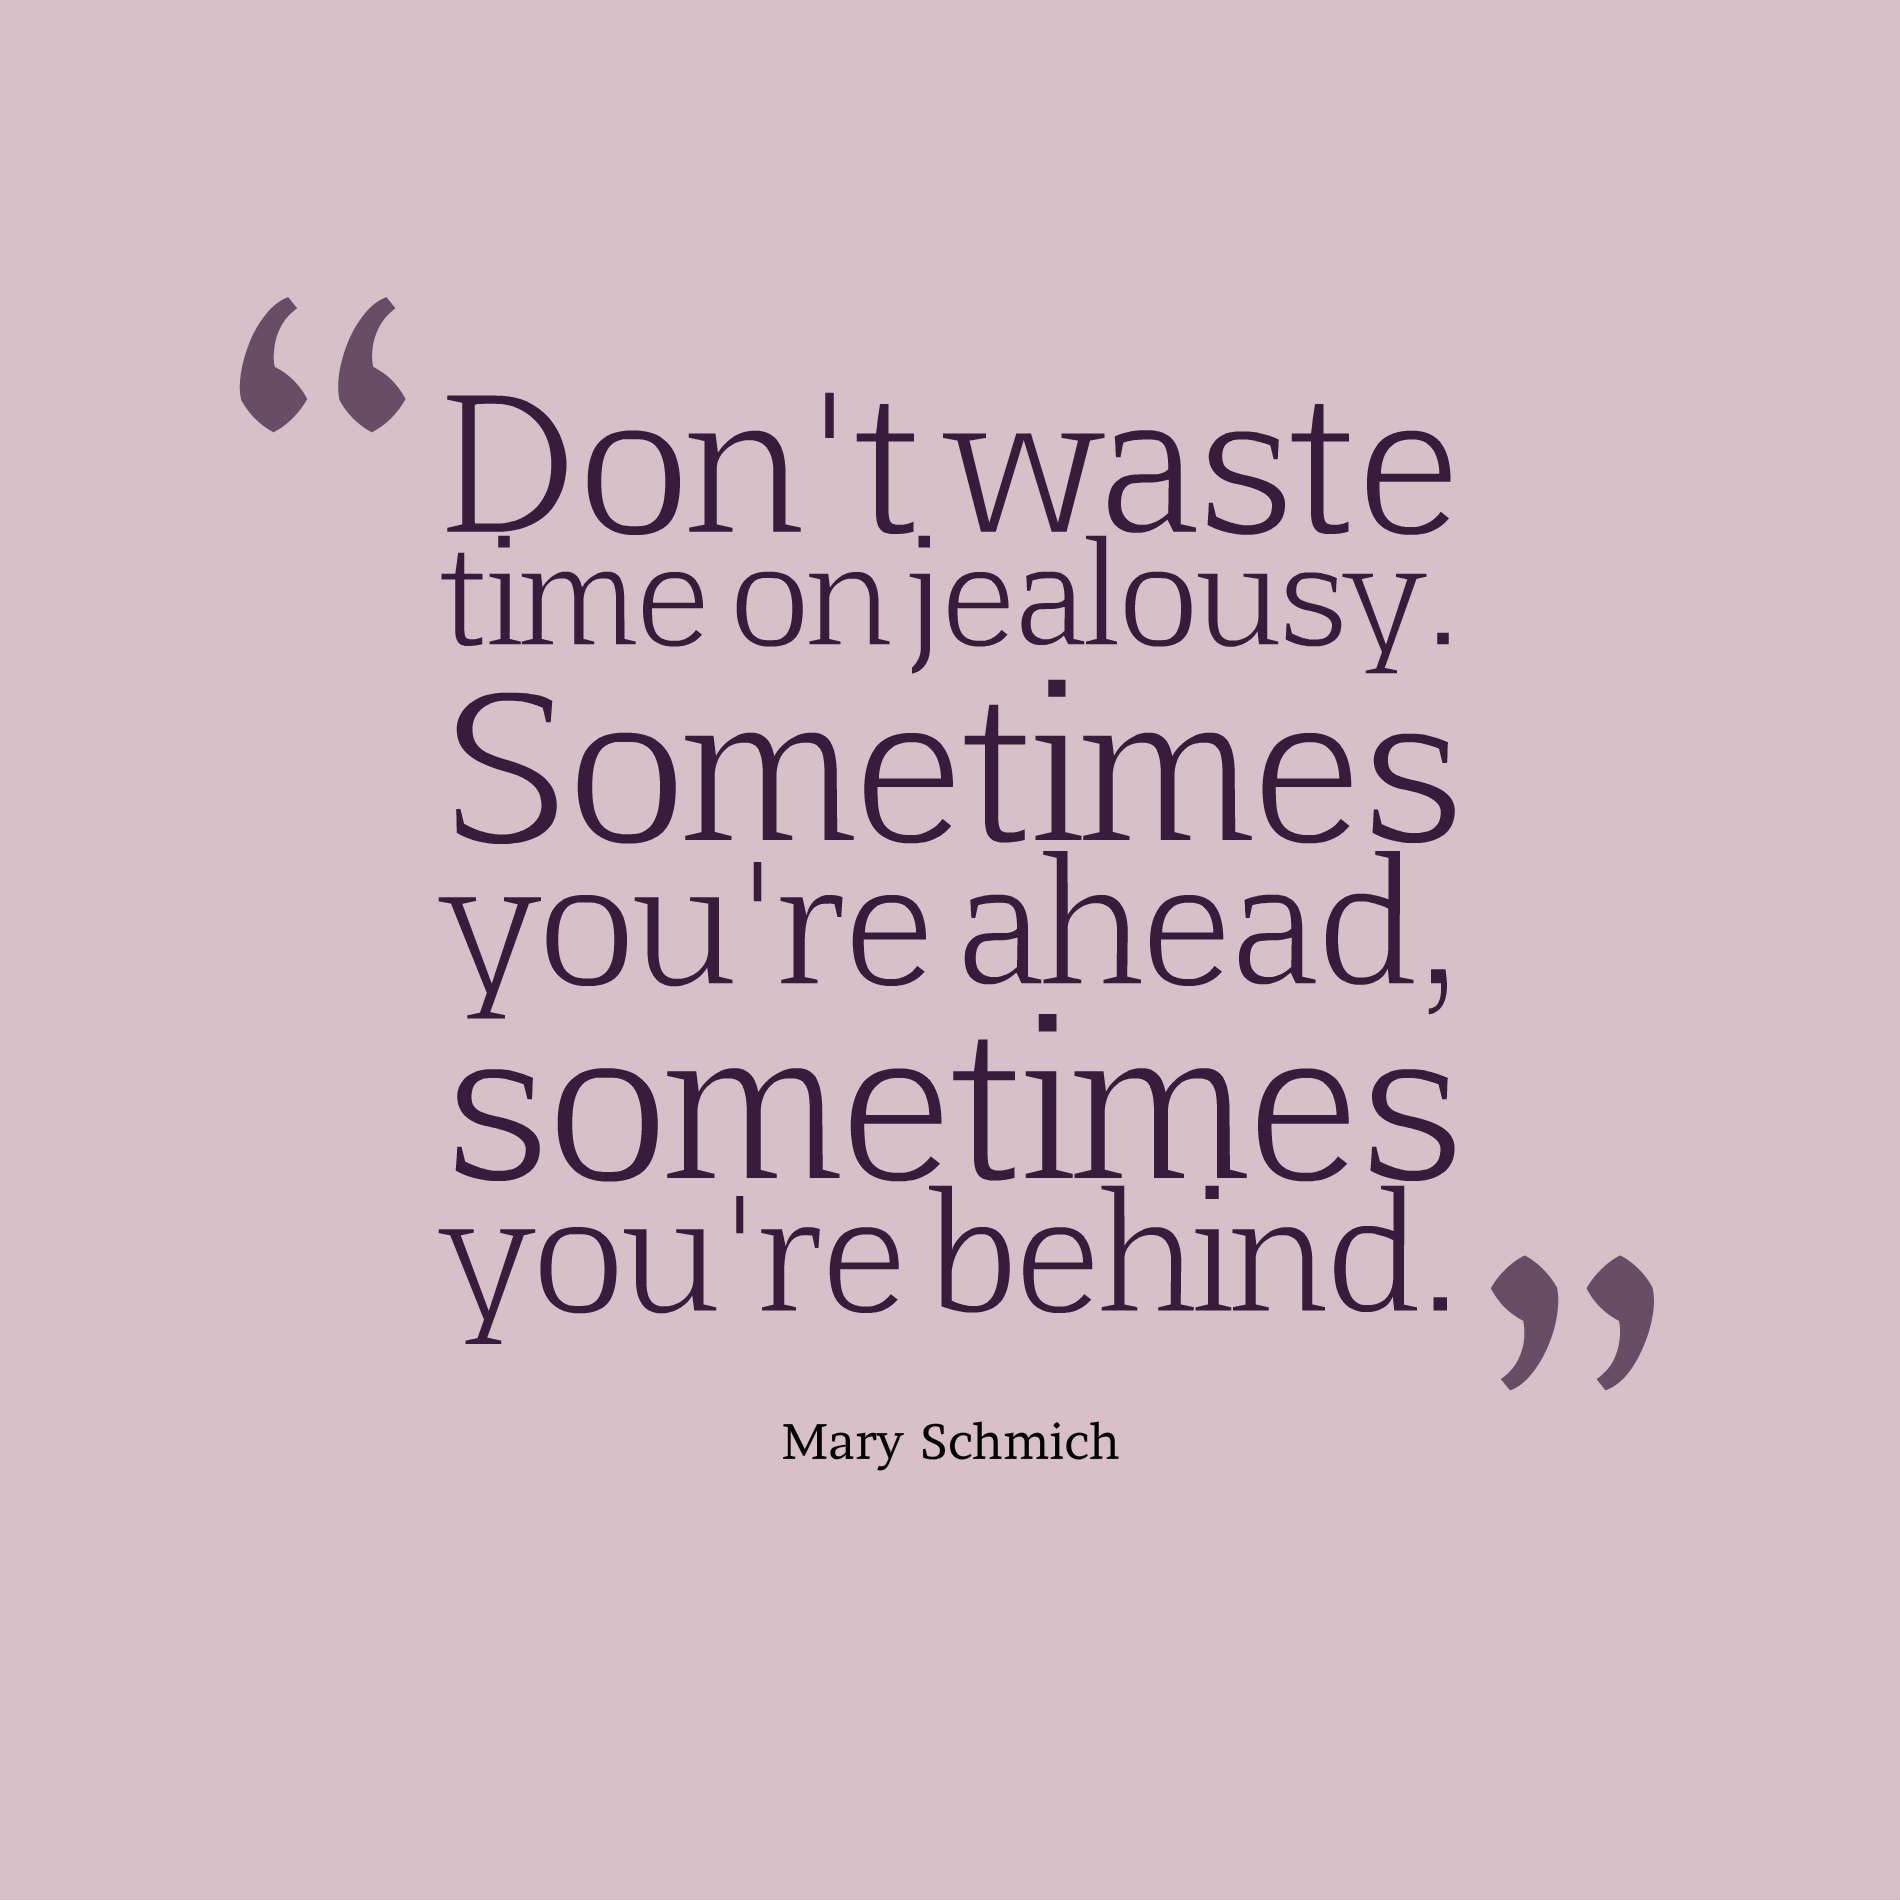 Don't waste time on jealousy. Sometimes you're ahead, sometimes you're behind.